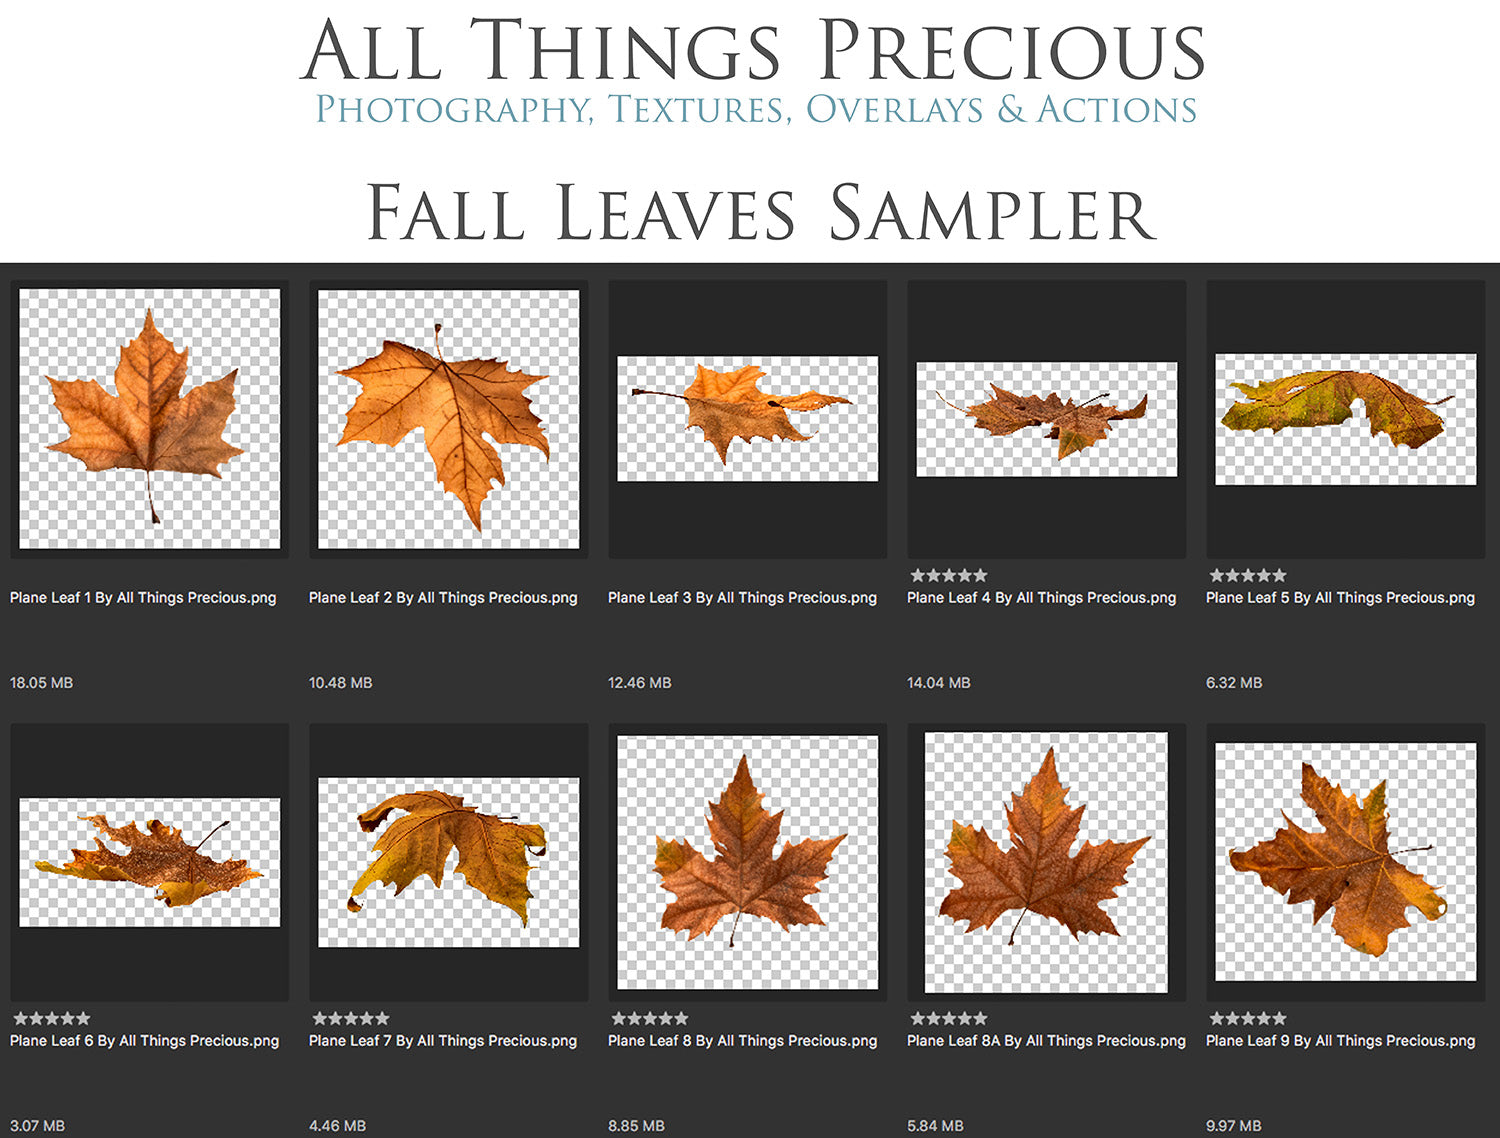 60 Leaf overlays for photography and digital scrapbooking. High resolution, leaves, autumn overlays, fall overlay, photo overlays by ATP textures.